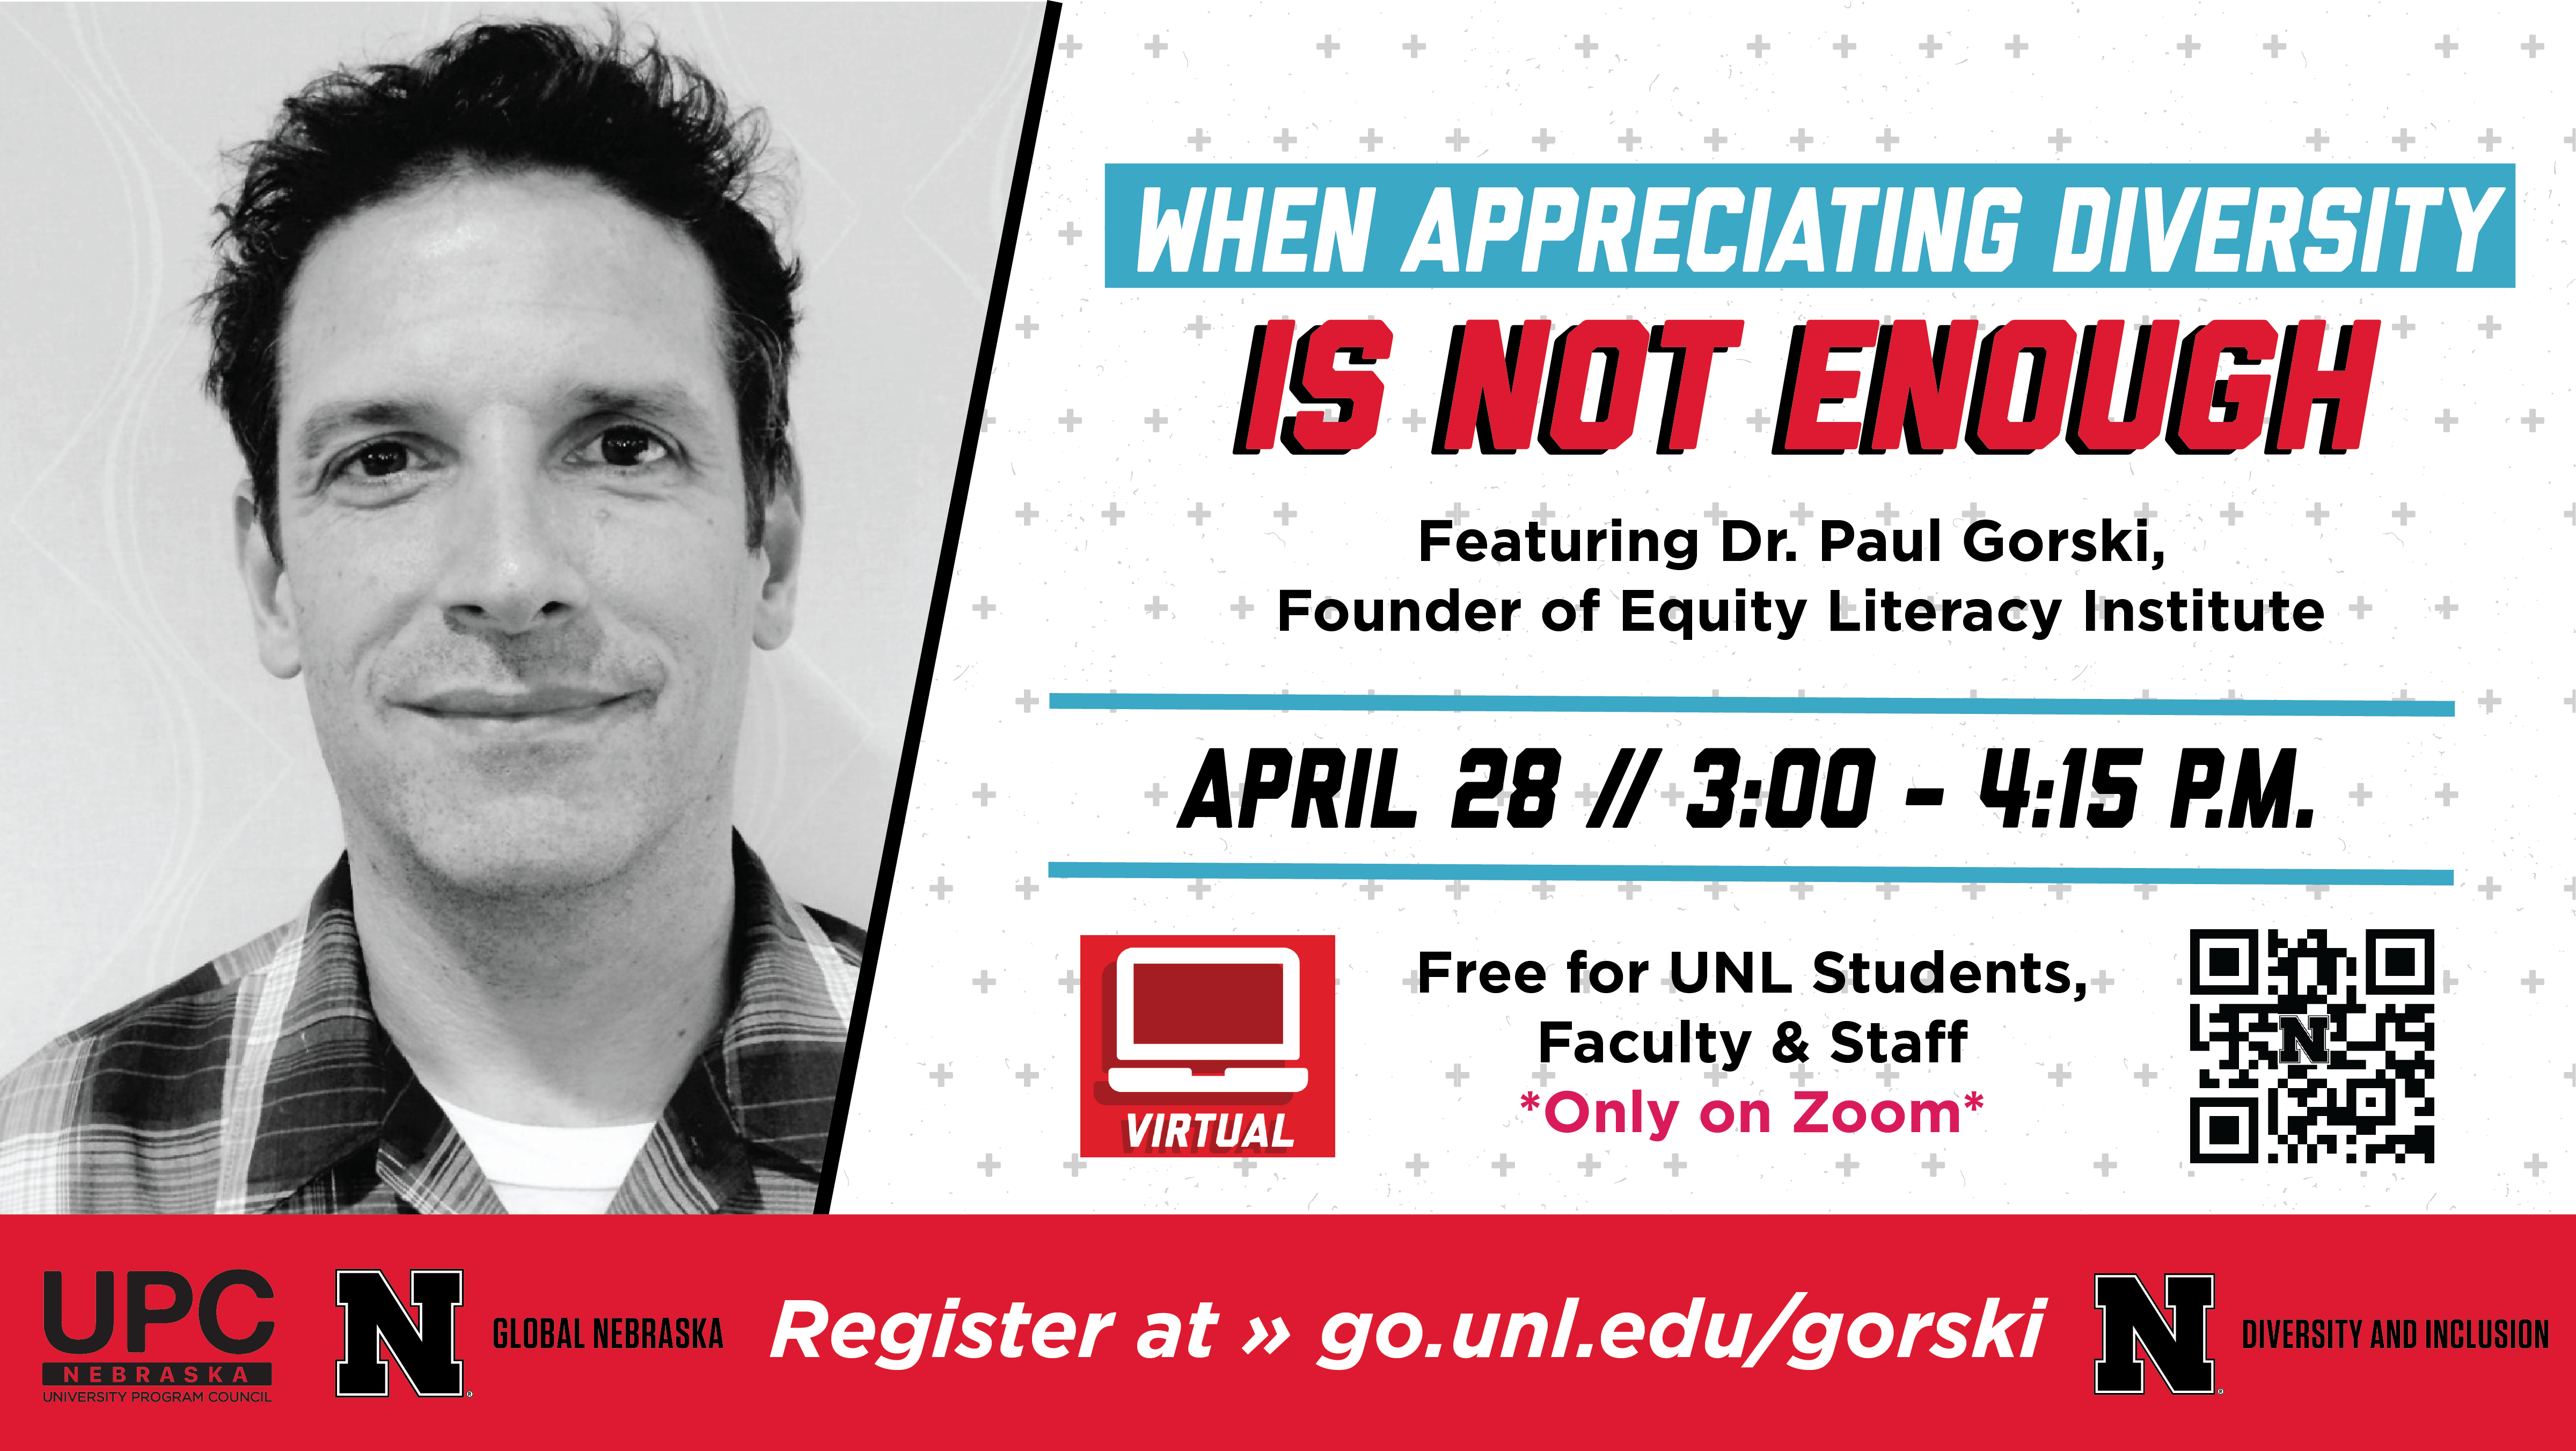 Join UPC Nebraska and the Global Nebraska Coalition on Diversity and Inclusion on April 28 at 3 PM for "When Appreciating Diversity Is Not Enough."